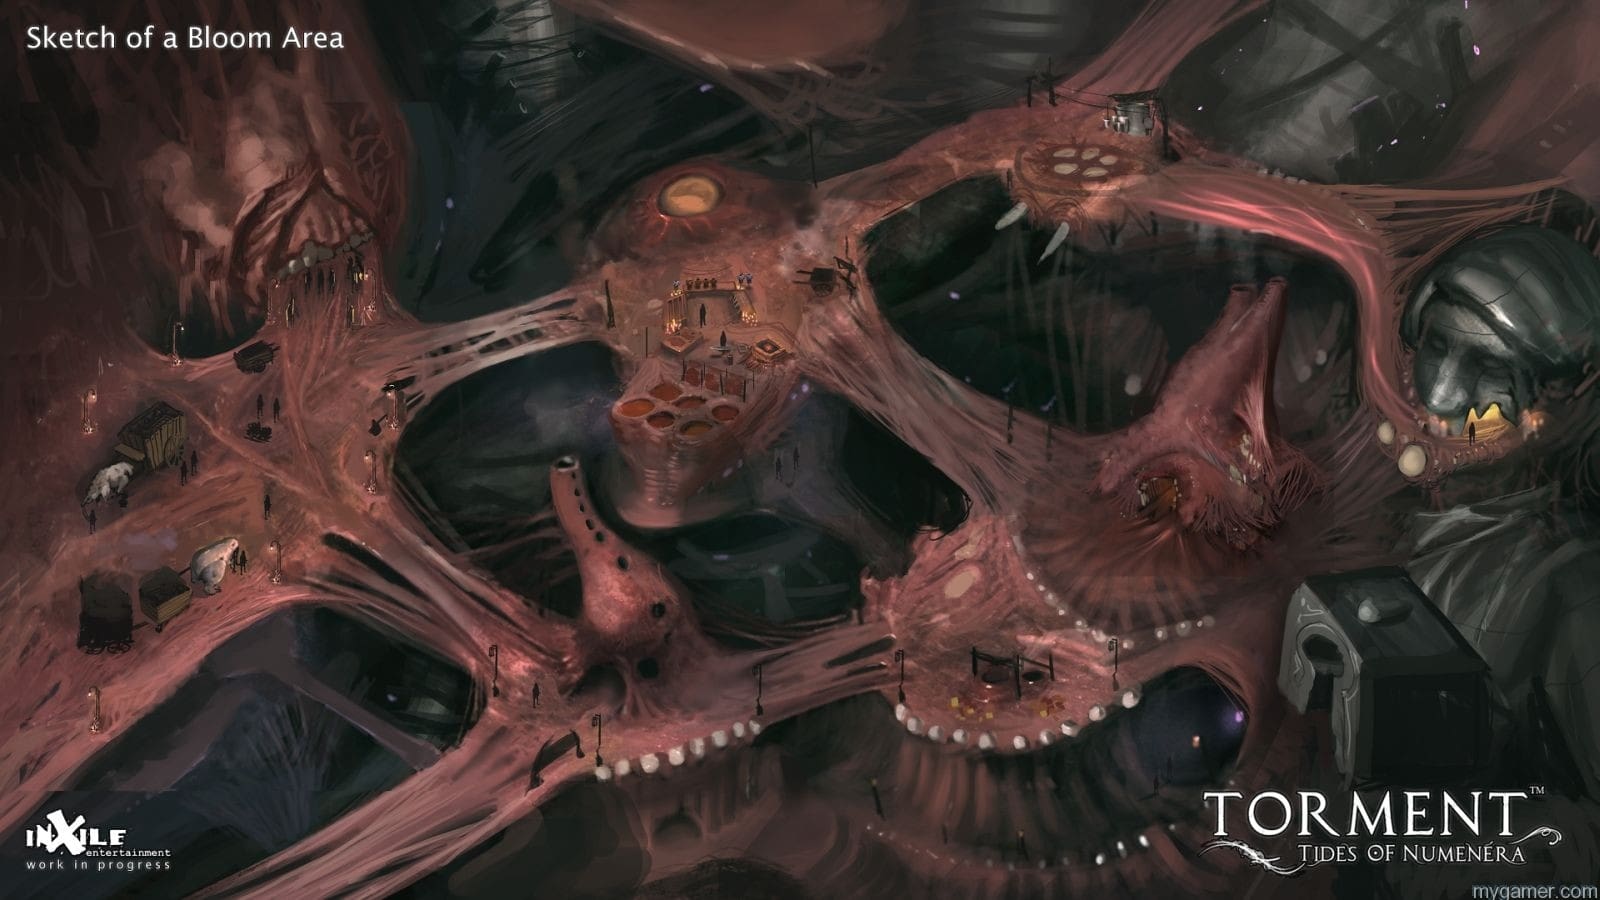 Torment-Tides-of-Numenera-Welcomes-George-Ziets-as-Lead-Area-Designer-435600-2